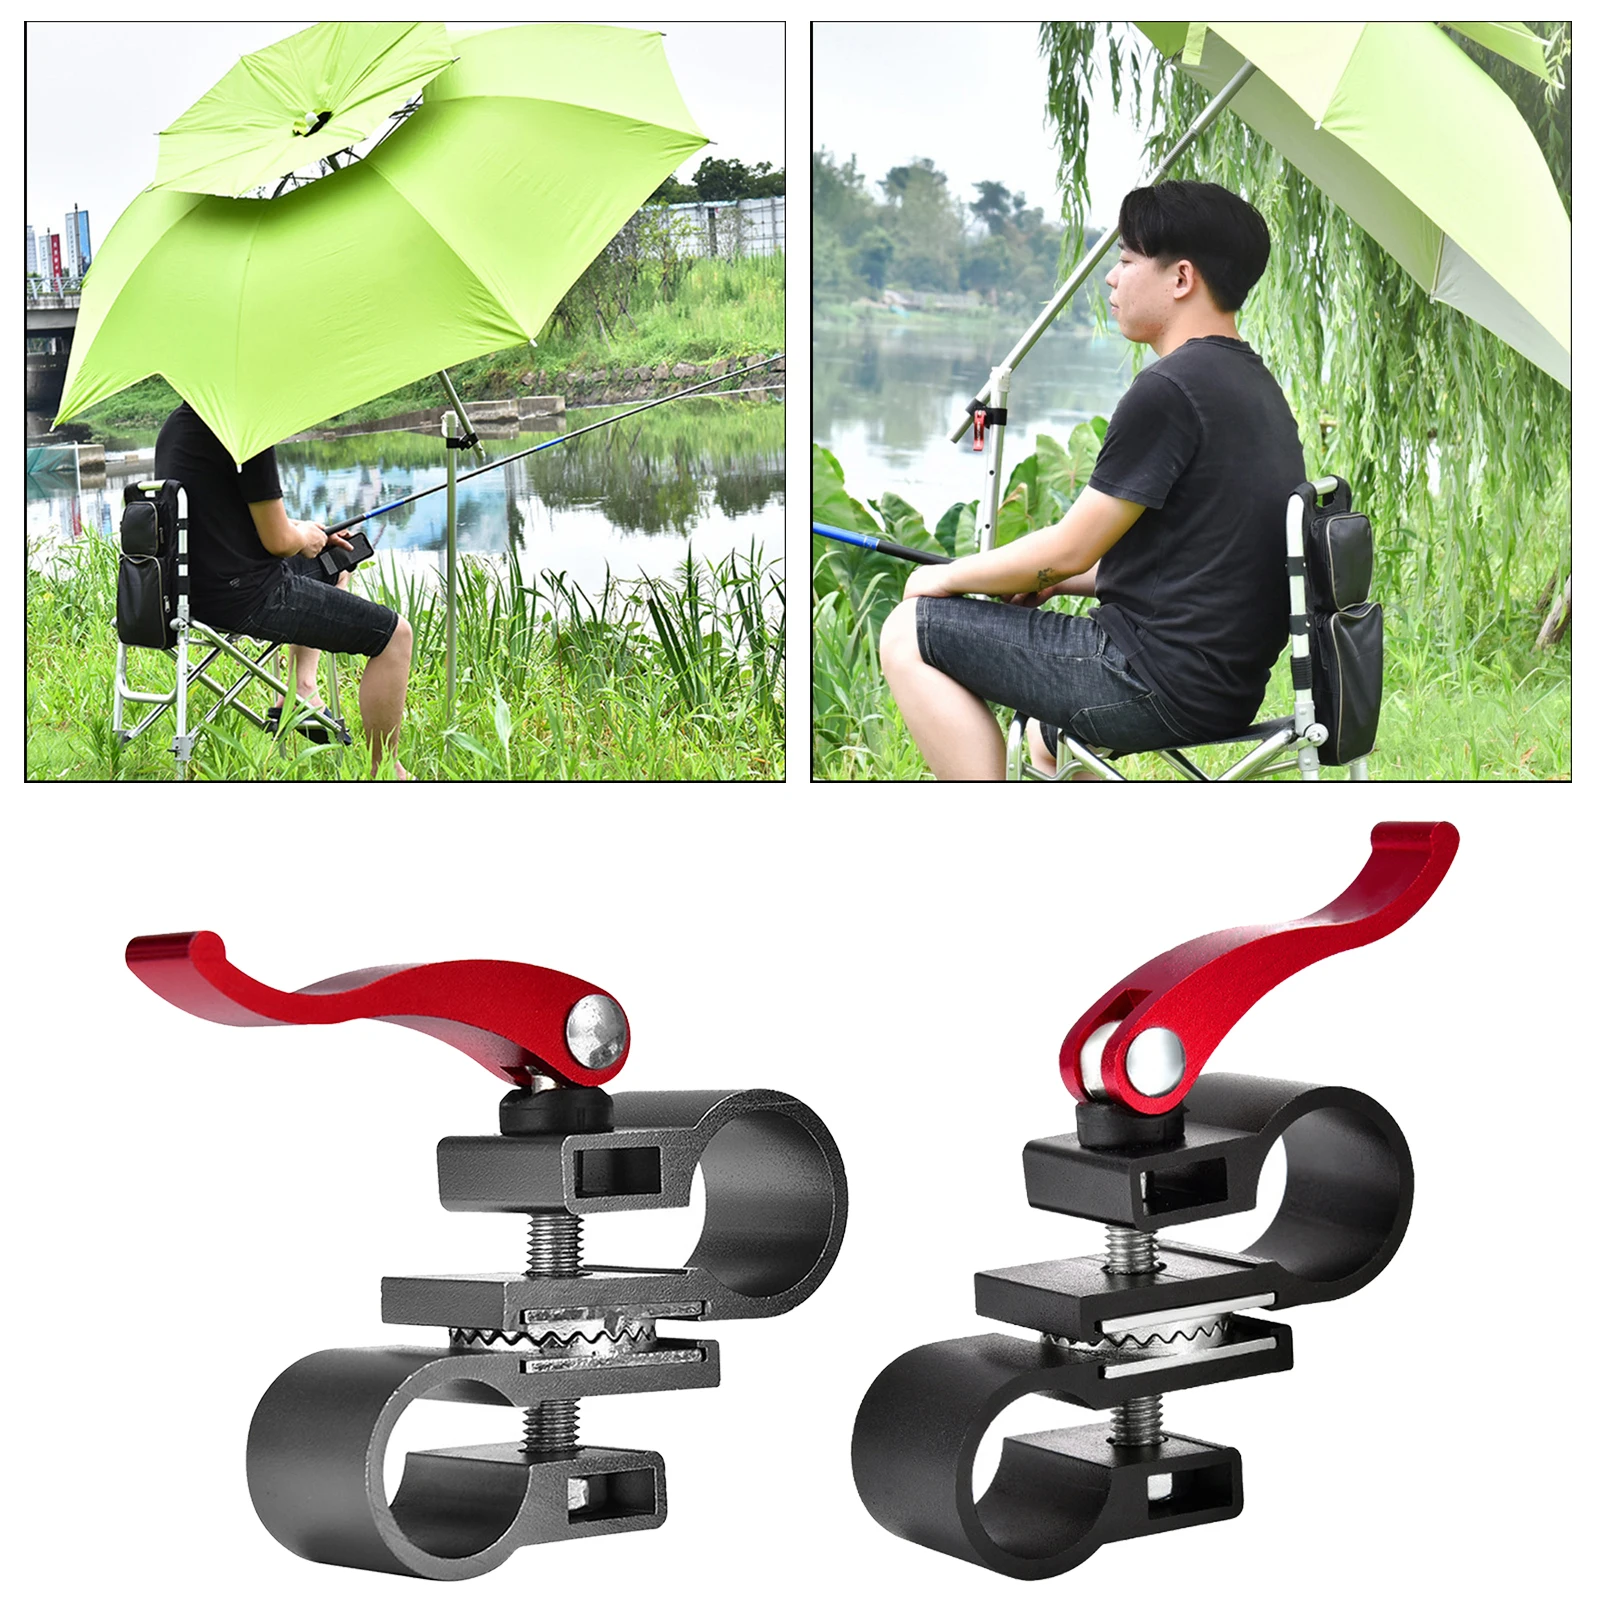 Umbrella Universal Stand Holder Fishing Chair Fishing Accessories Fixed Tool r 